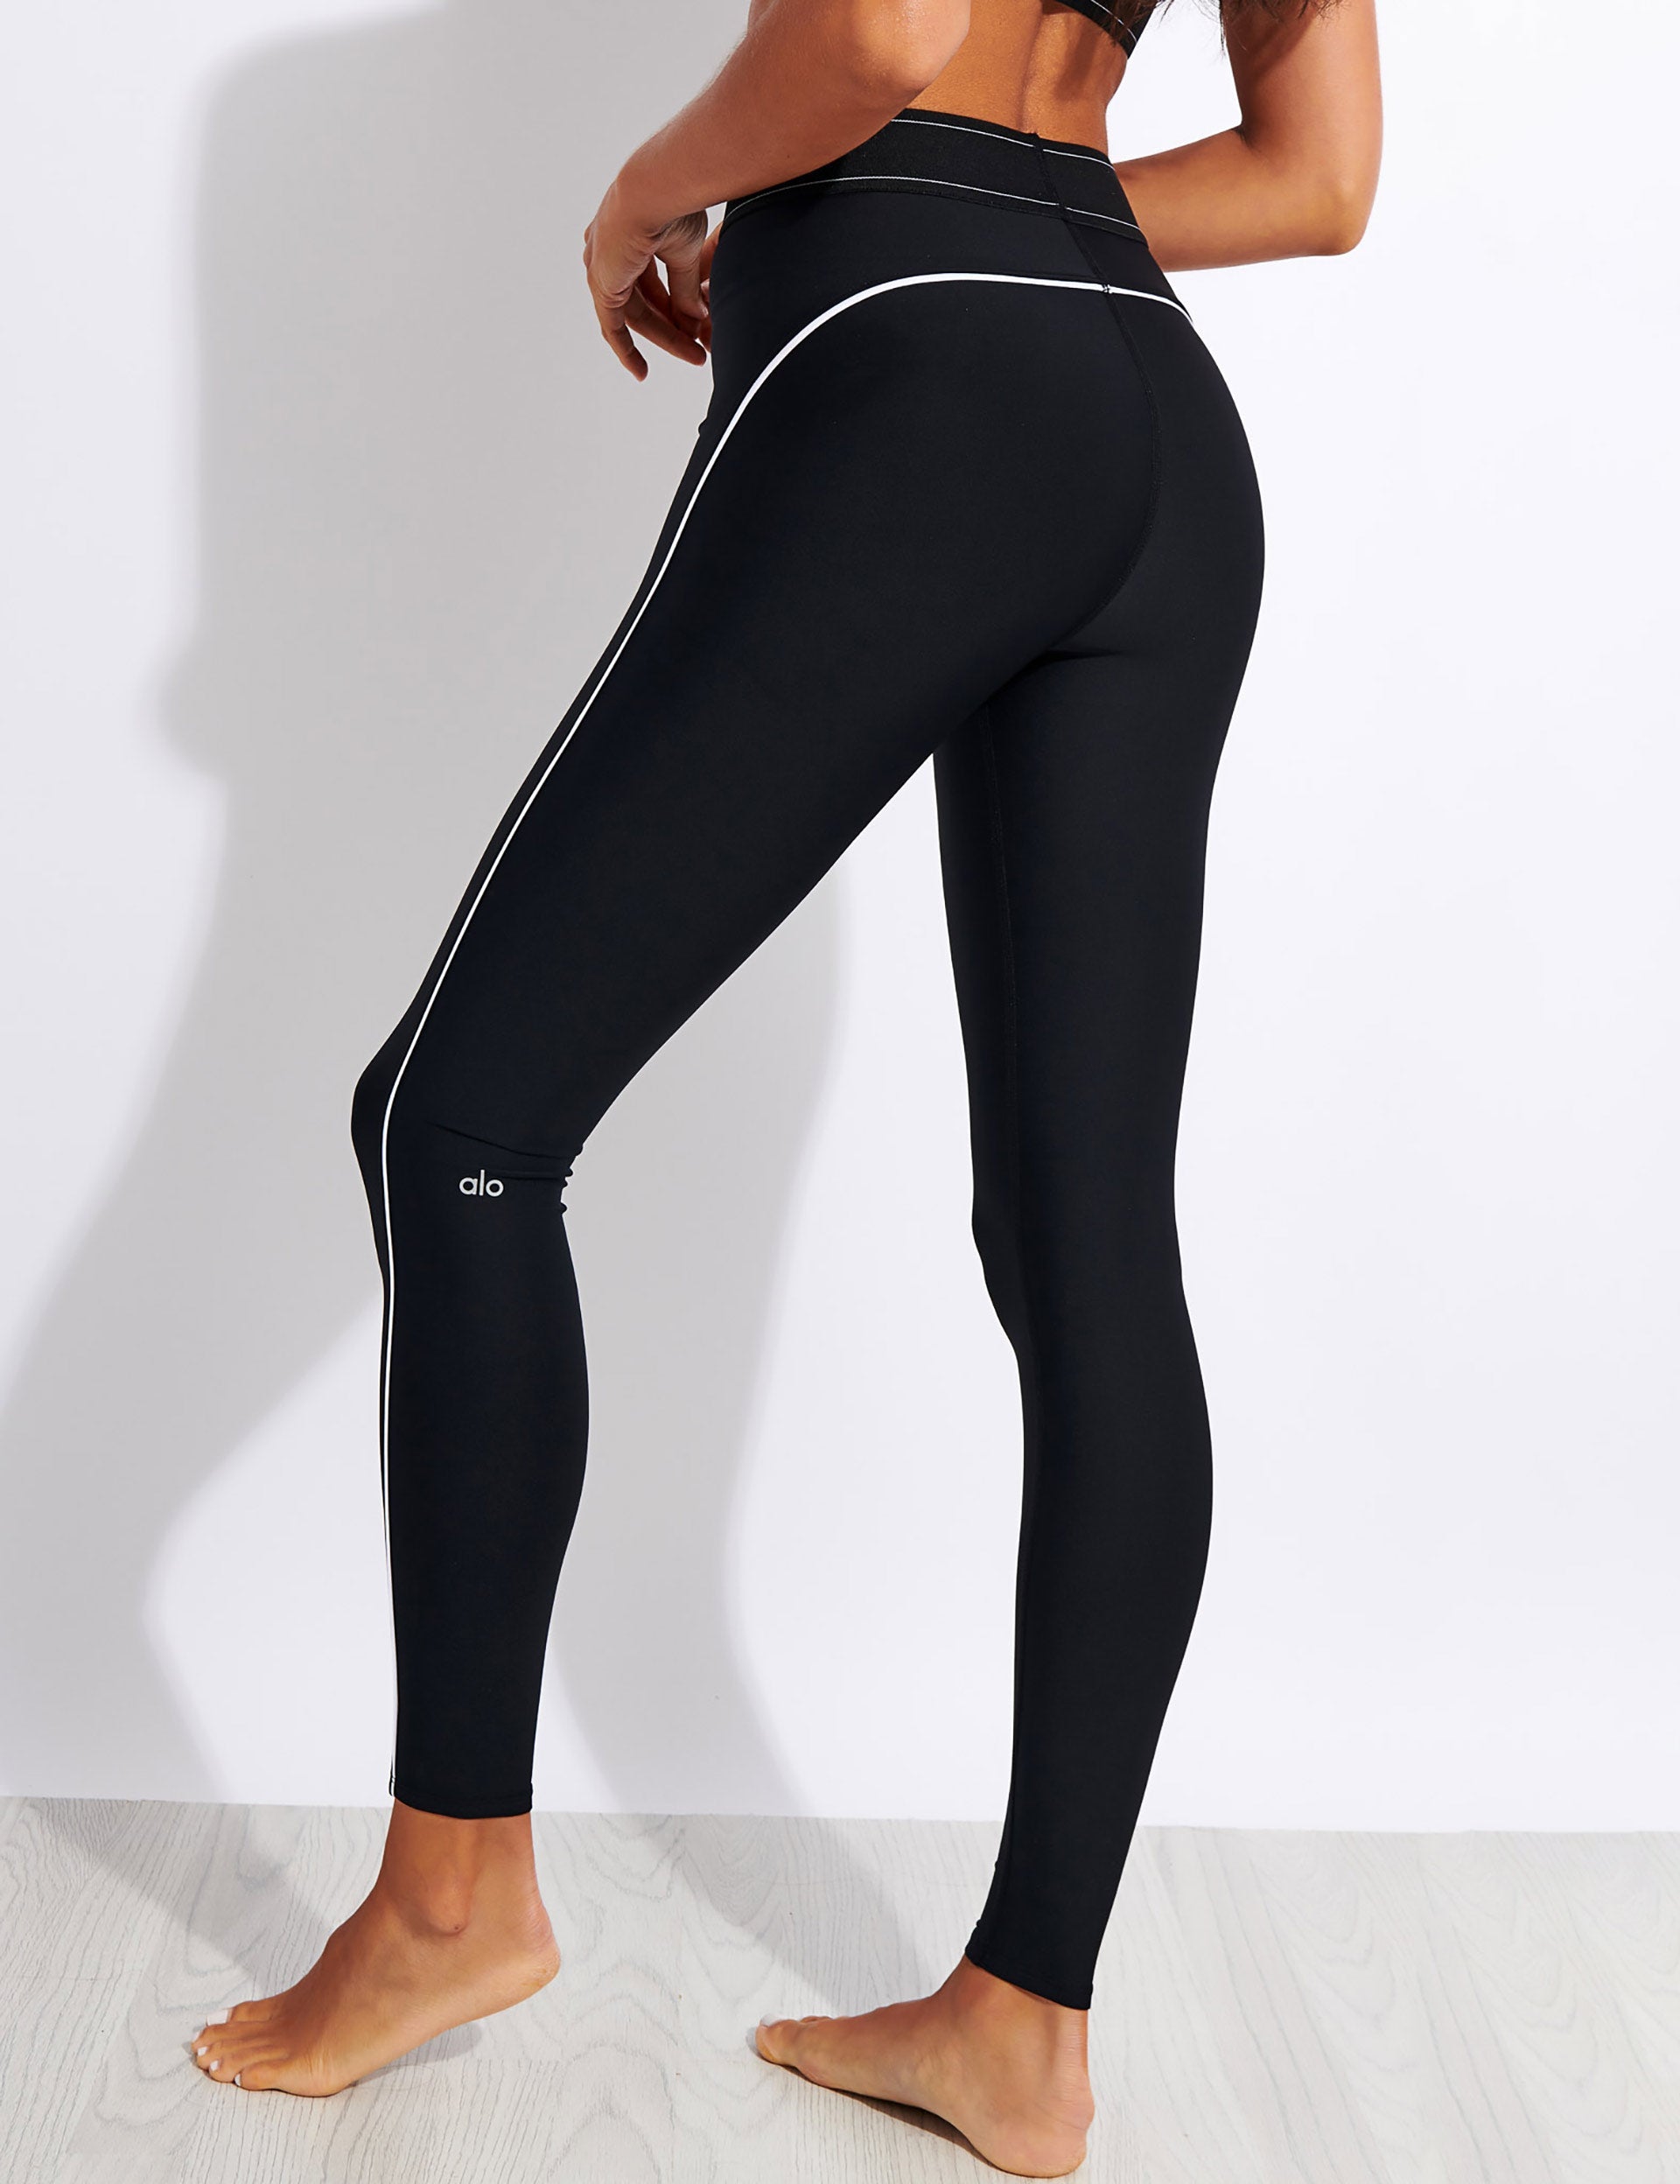 Alo Yoga | Airlift High Waist Suit Up Legging Black | The Sports Edit